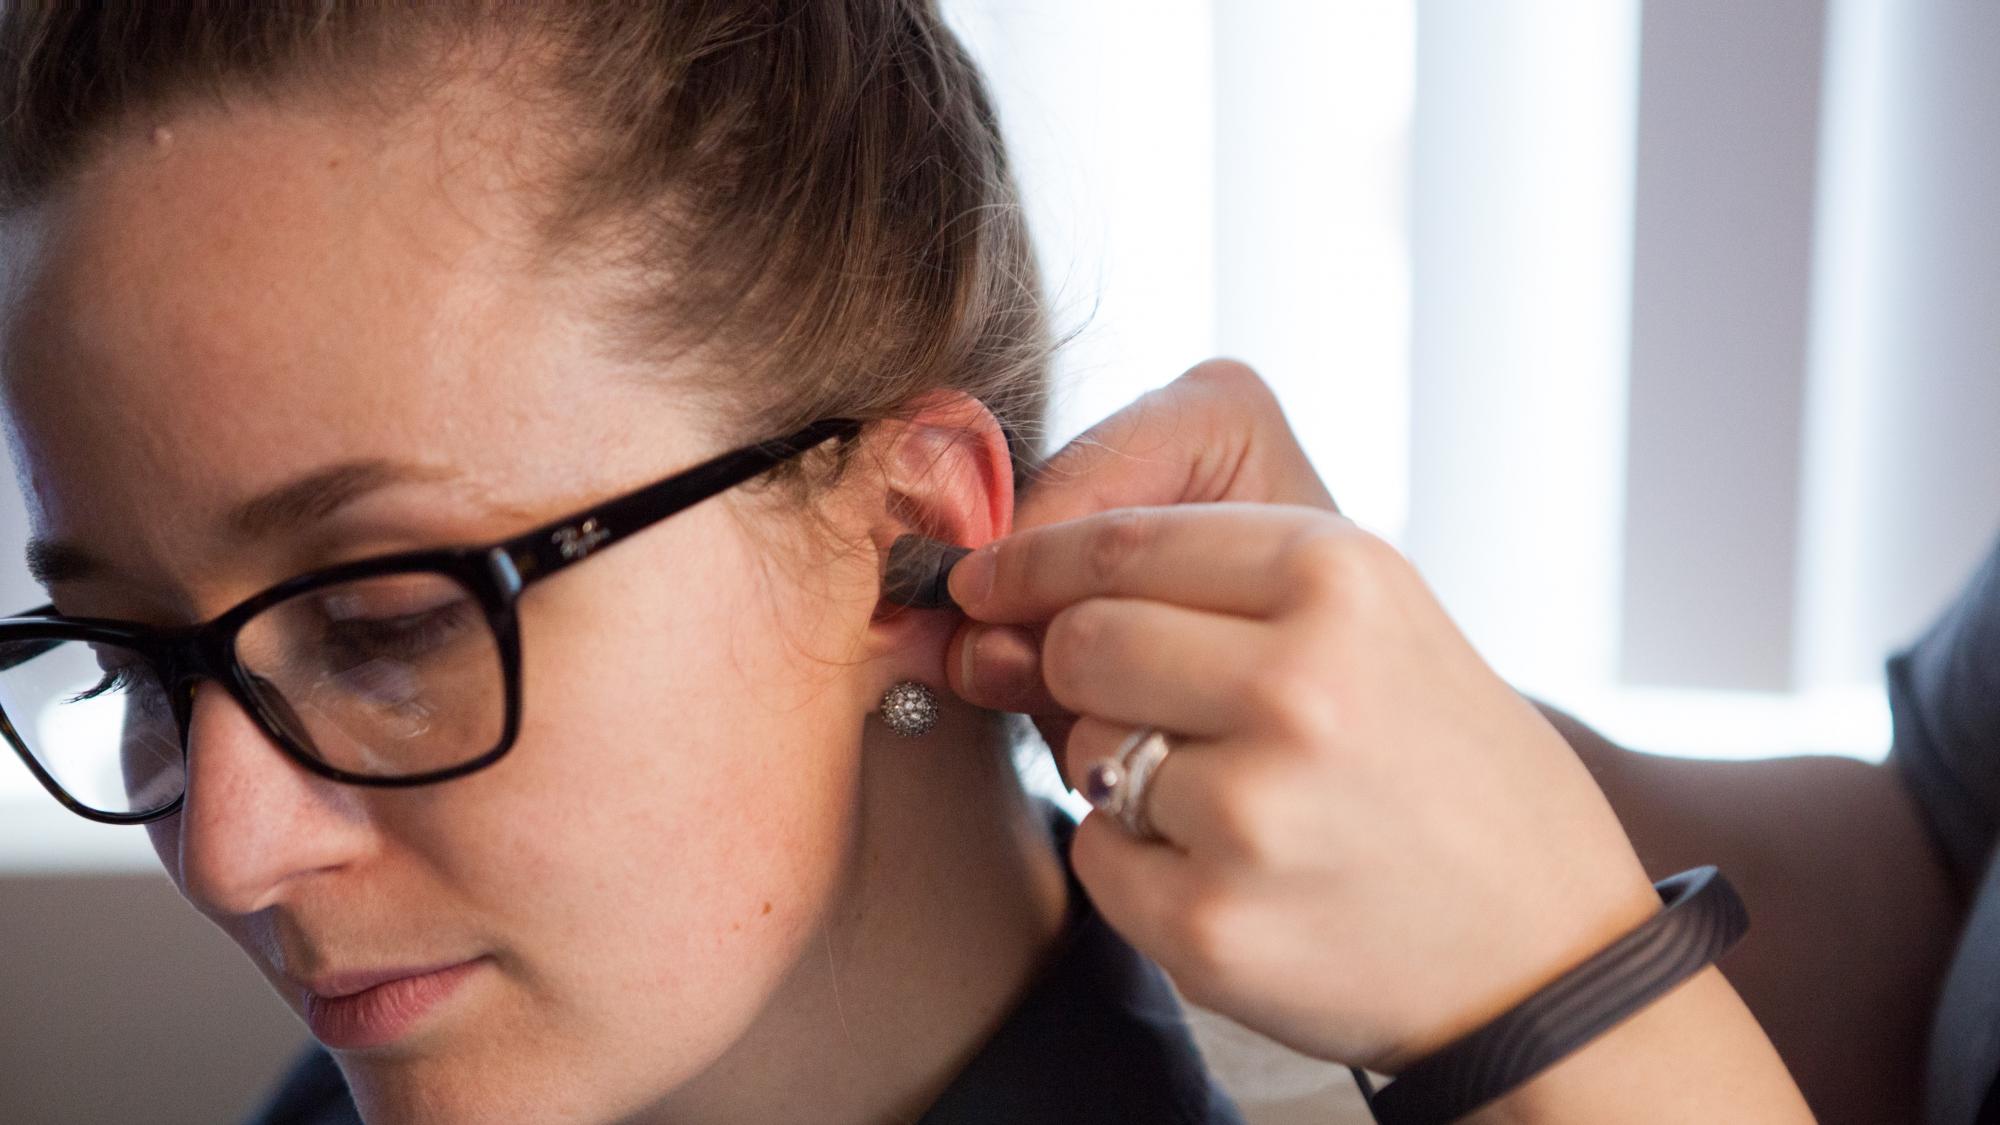 Girl wearing glasses getting her hearing examined.